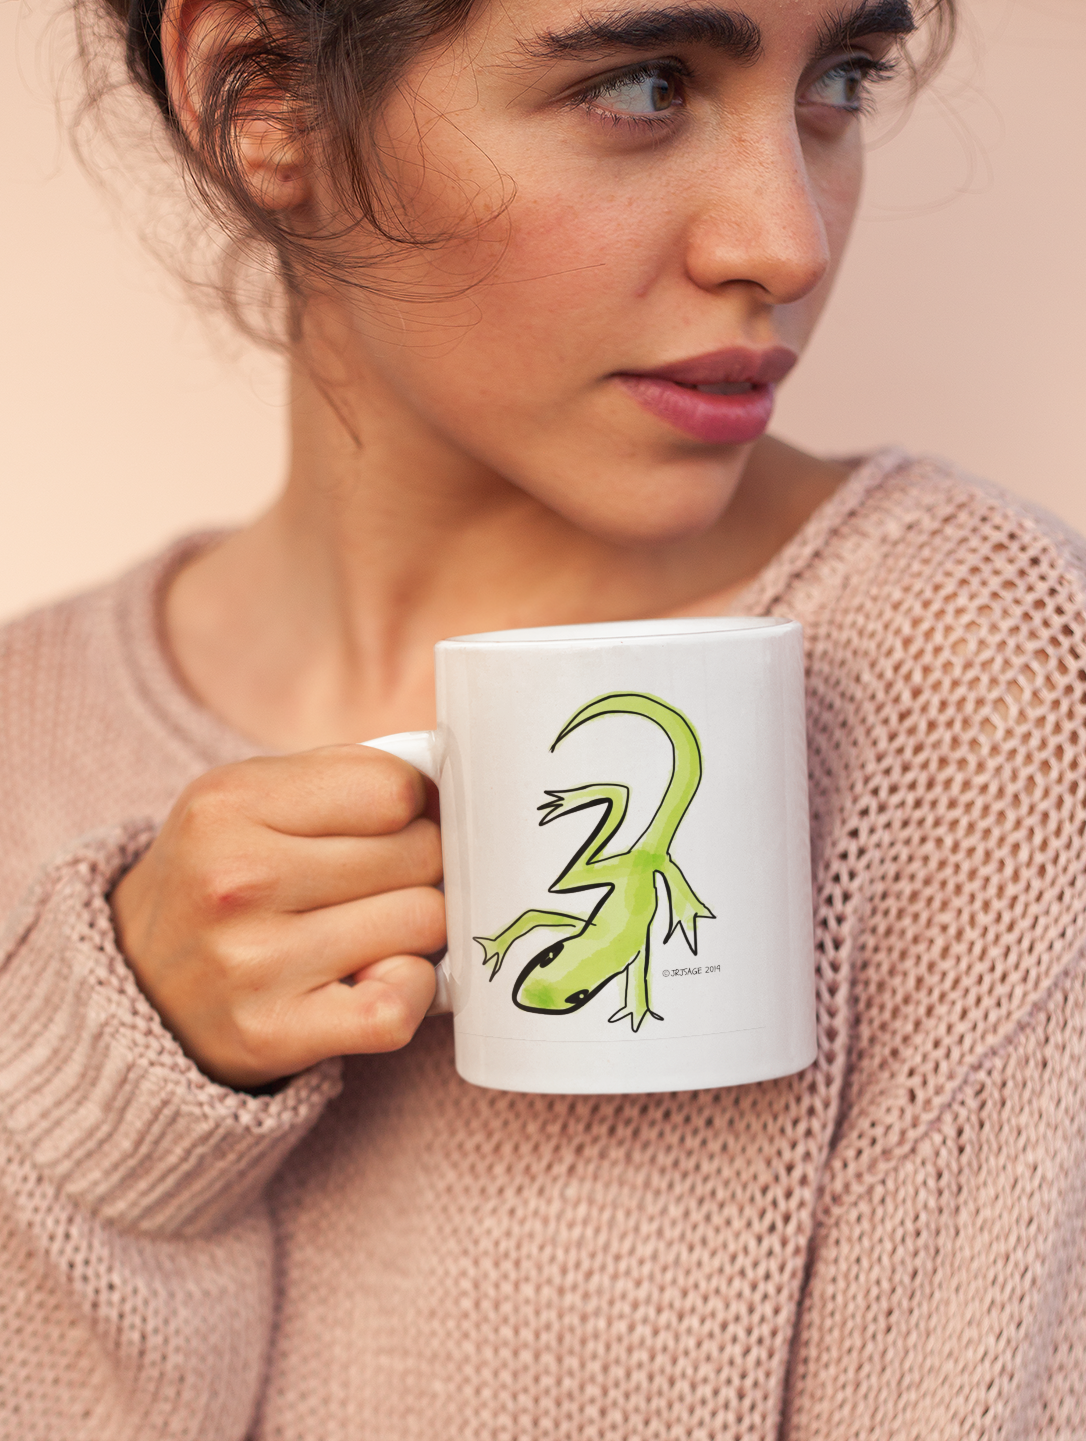 Young woman holding a ceramic white Hector and Bone mug with a Green Lizard illustration